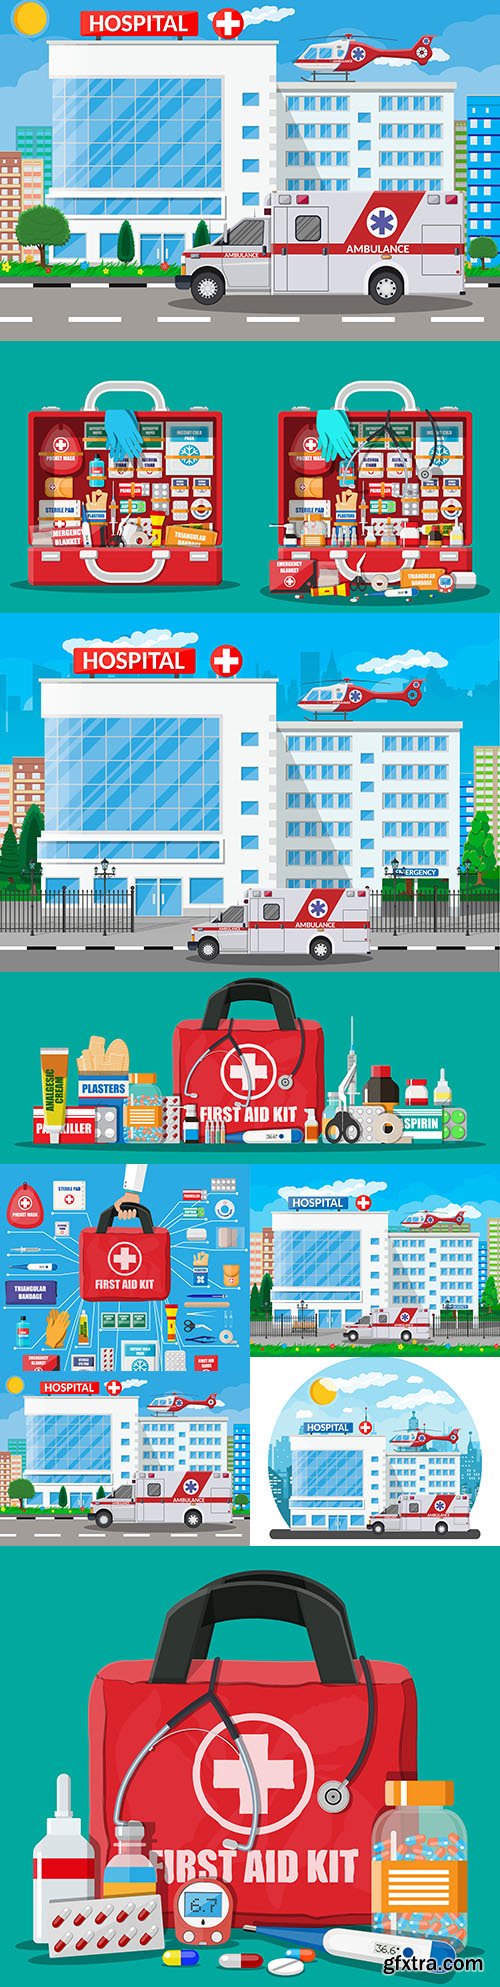 Hospital with ambulance and medical suitcase with tools